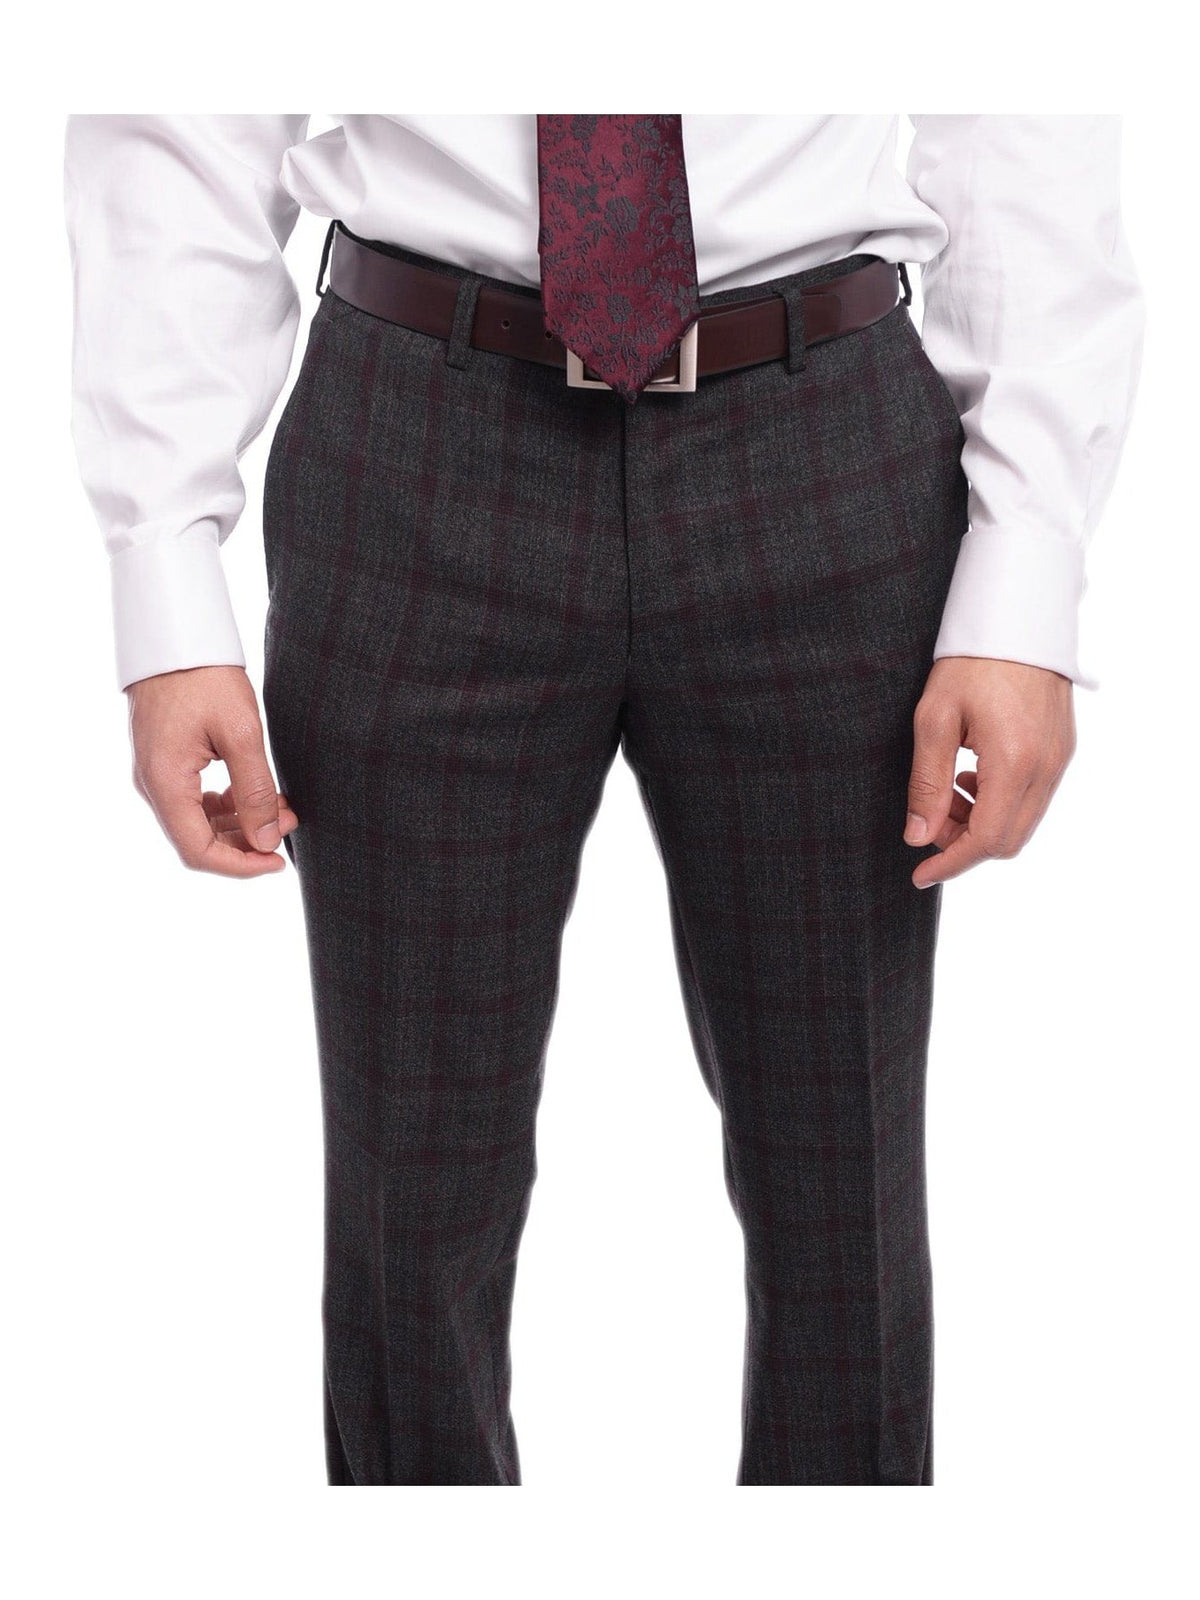 Napoli Sale Suits Napoli Slim Fit Gray &amp; Red Plaid Windowpane Half Canvased Super 150s Wool Suit